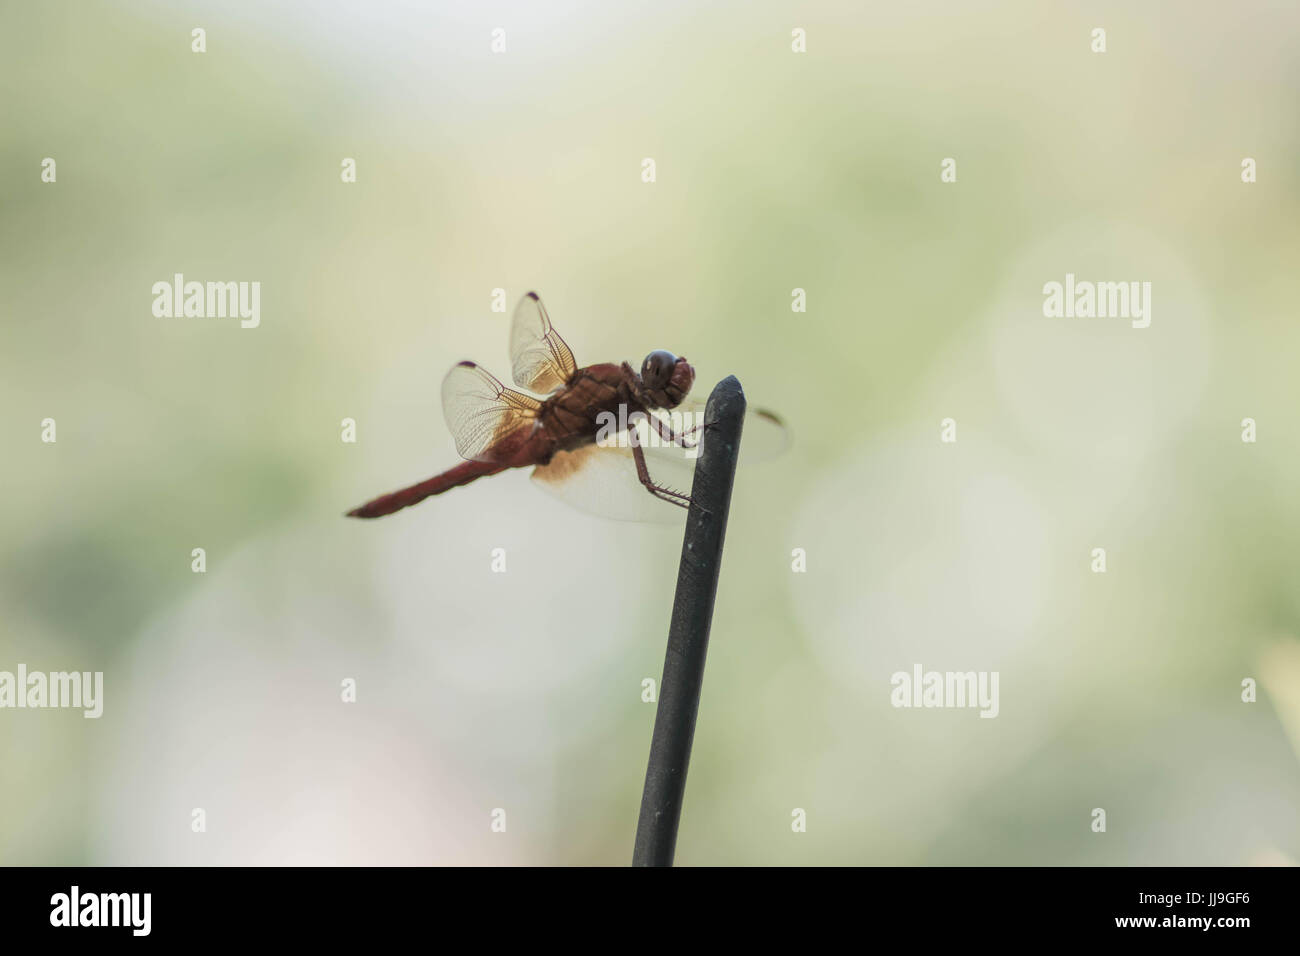 A resting red dragonfly Stock Photo